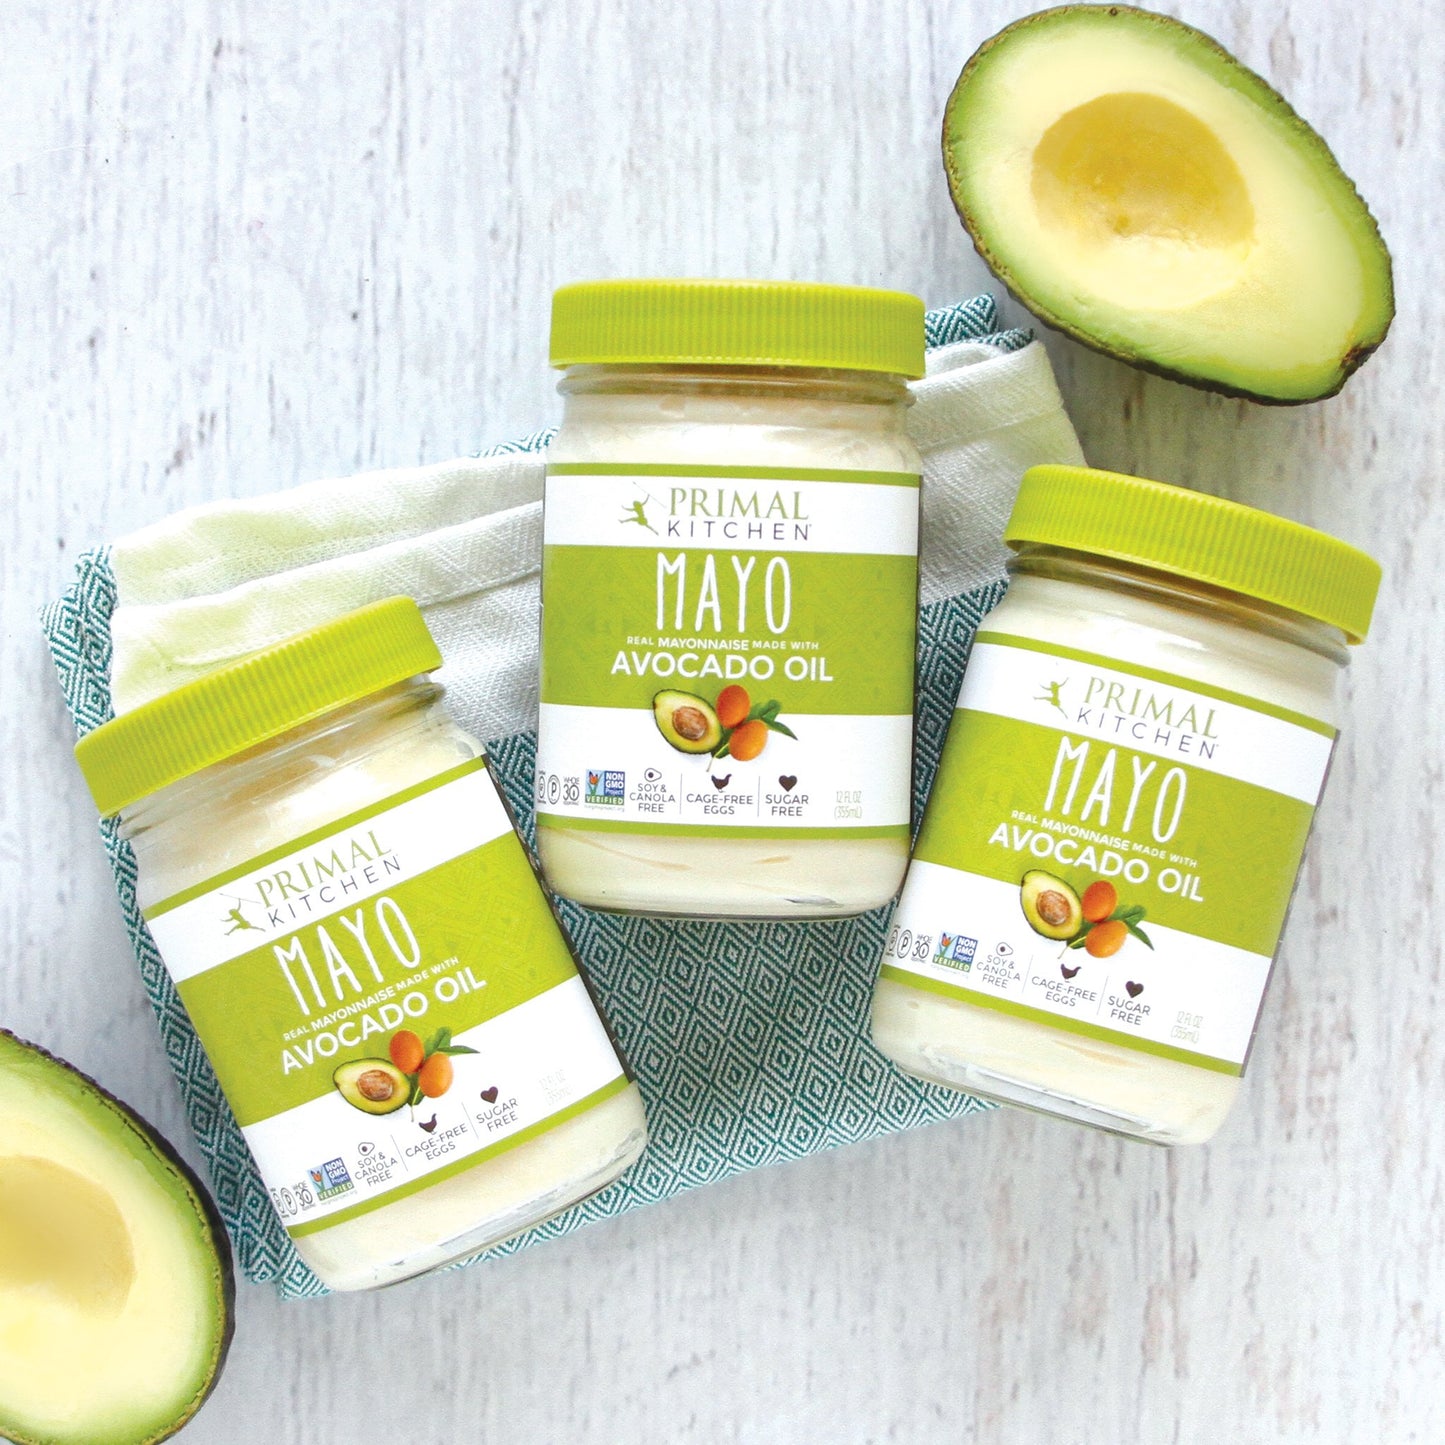 Primal Kitchen Mayo made with Avocado Oil - 3-Pack